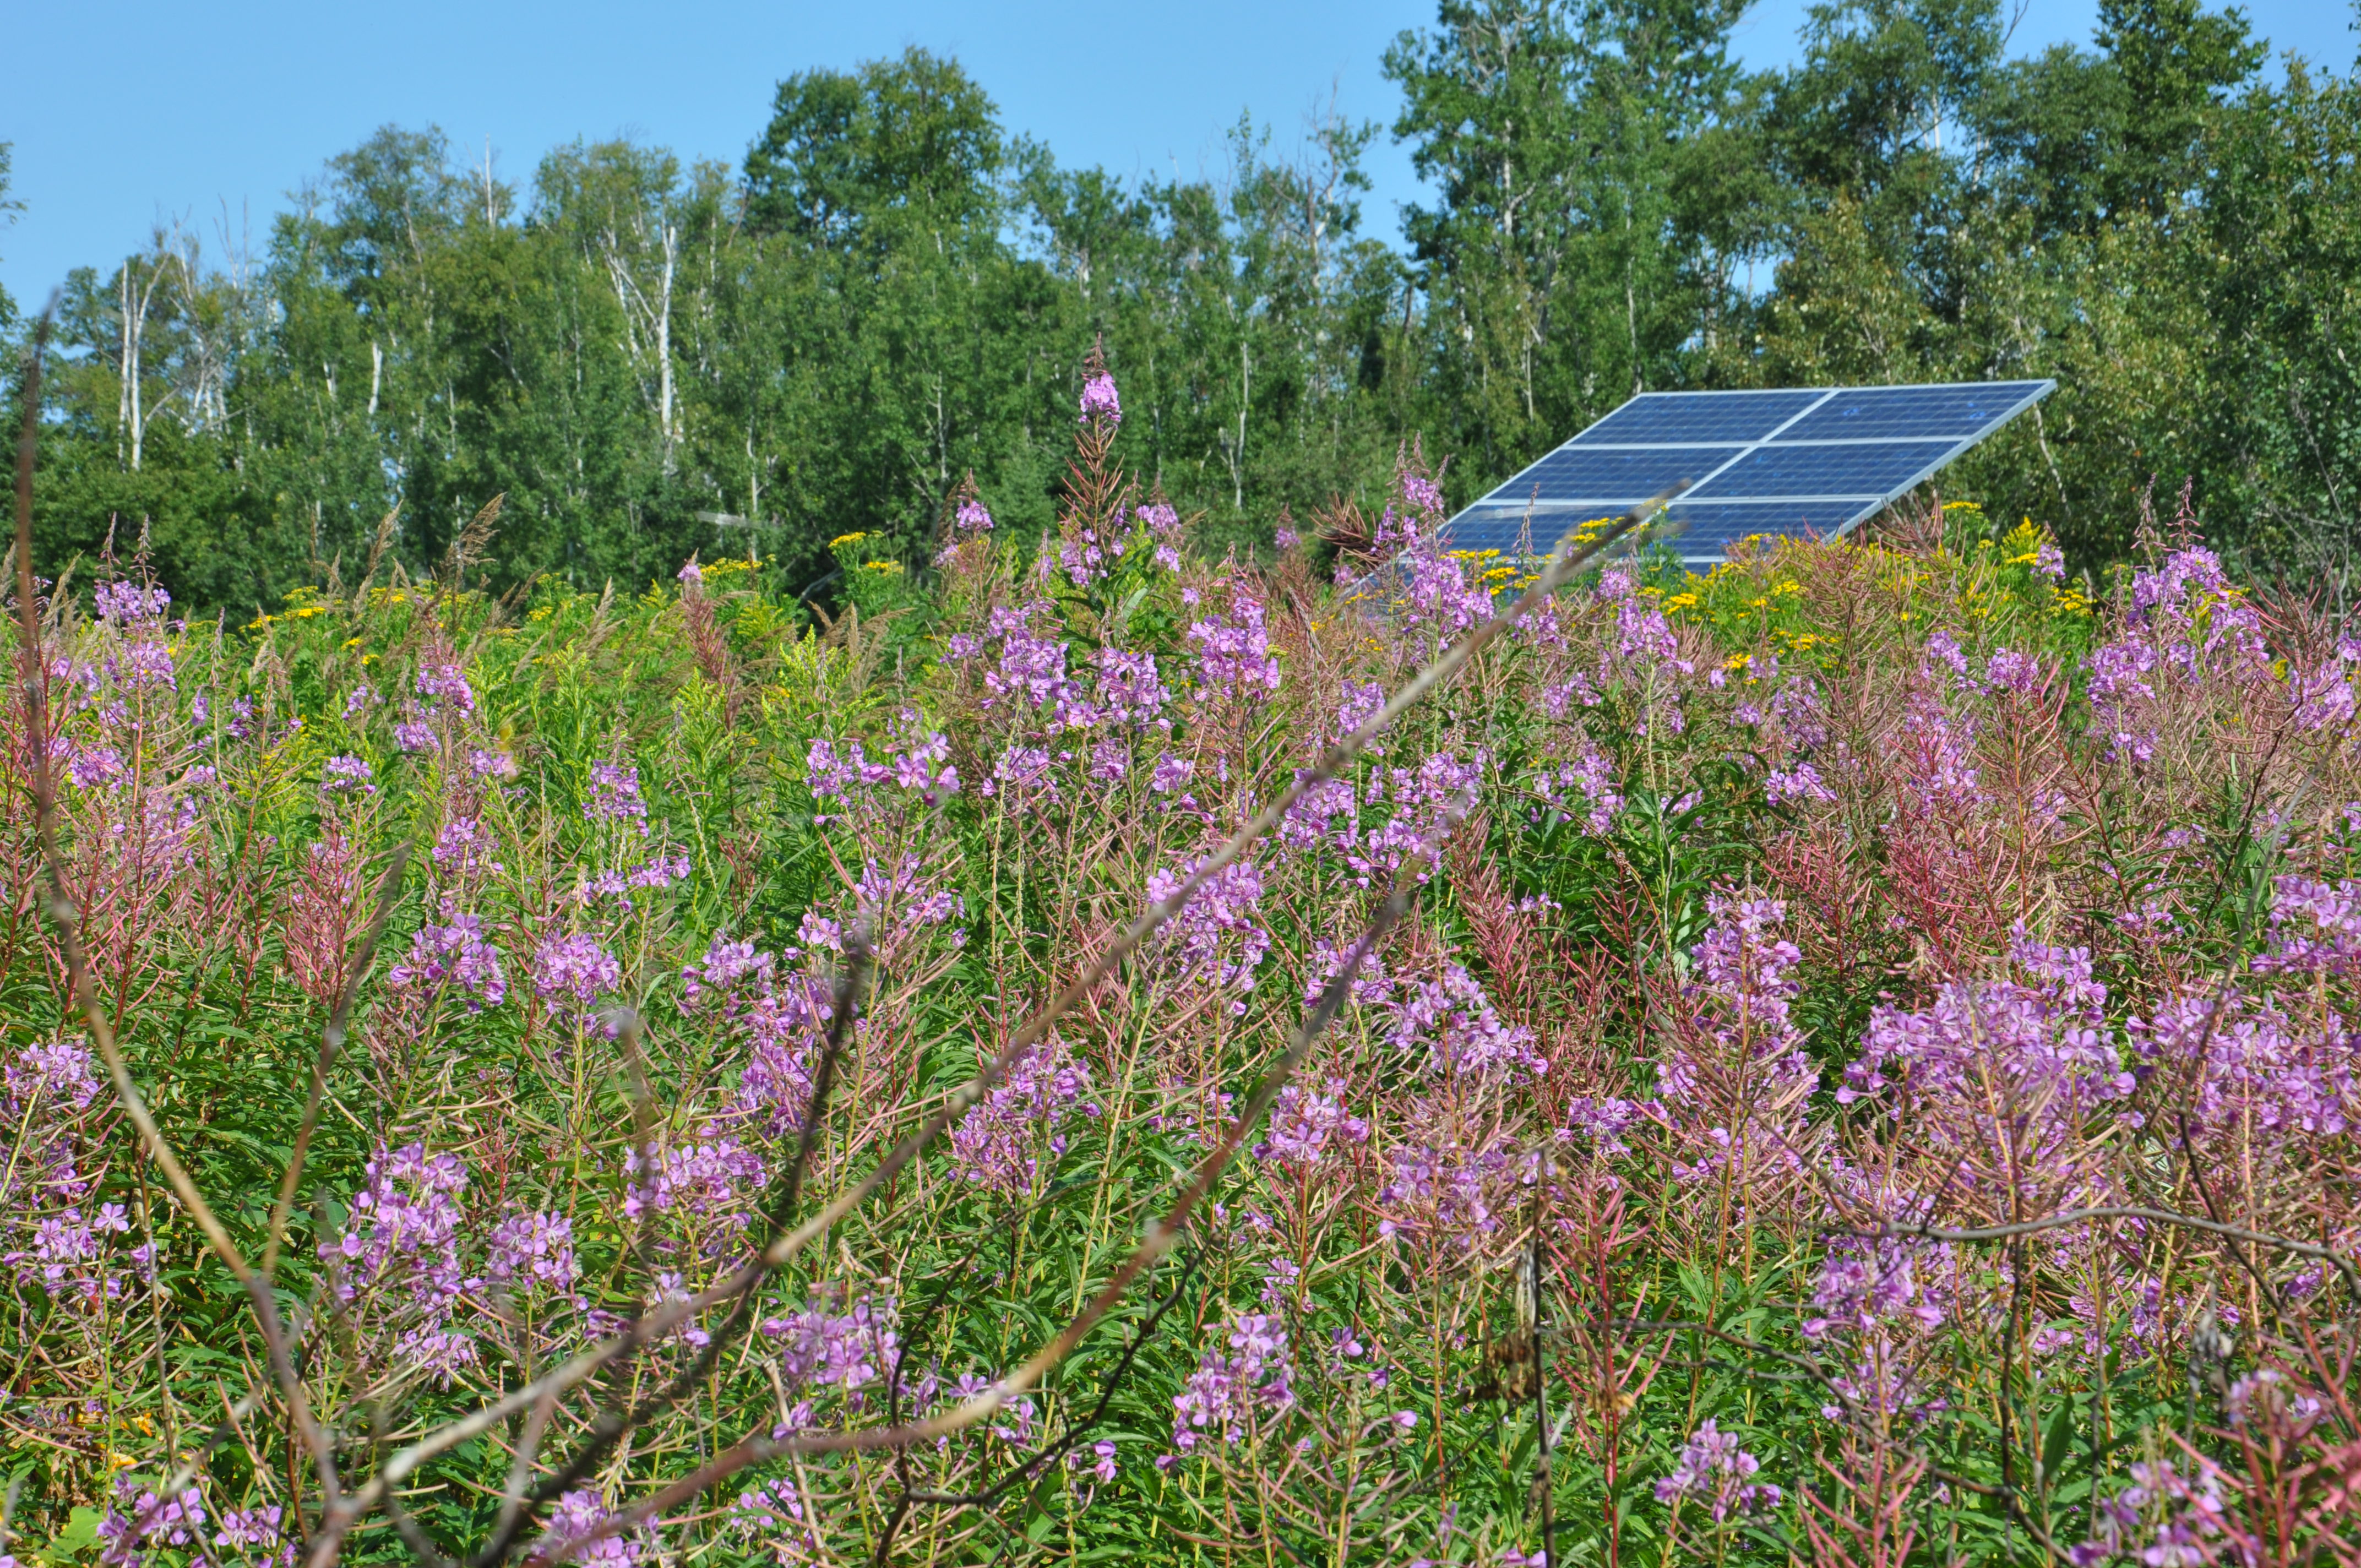 Solar panels are visible in the background behind purple fireweed flowers.